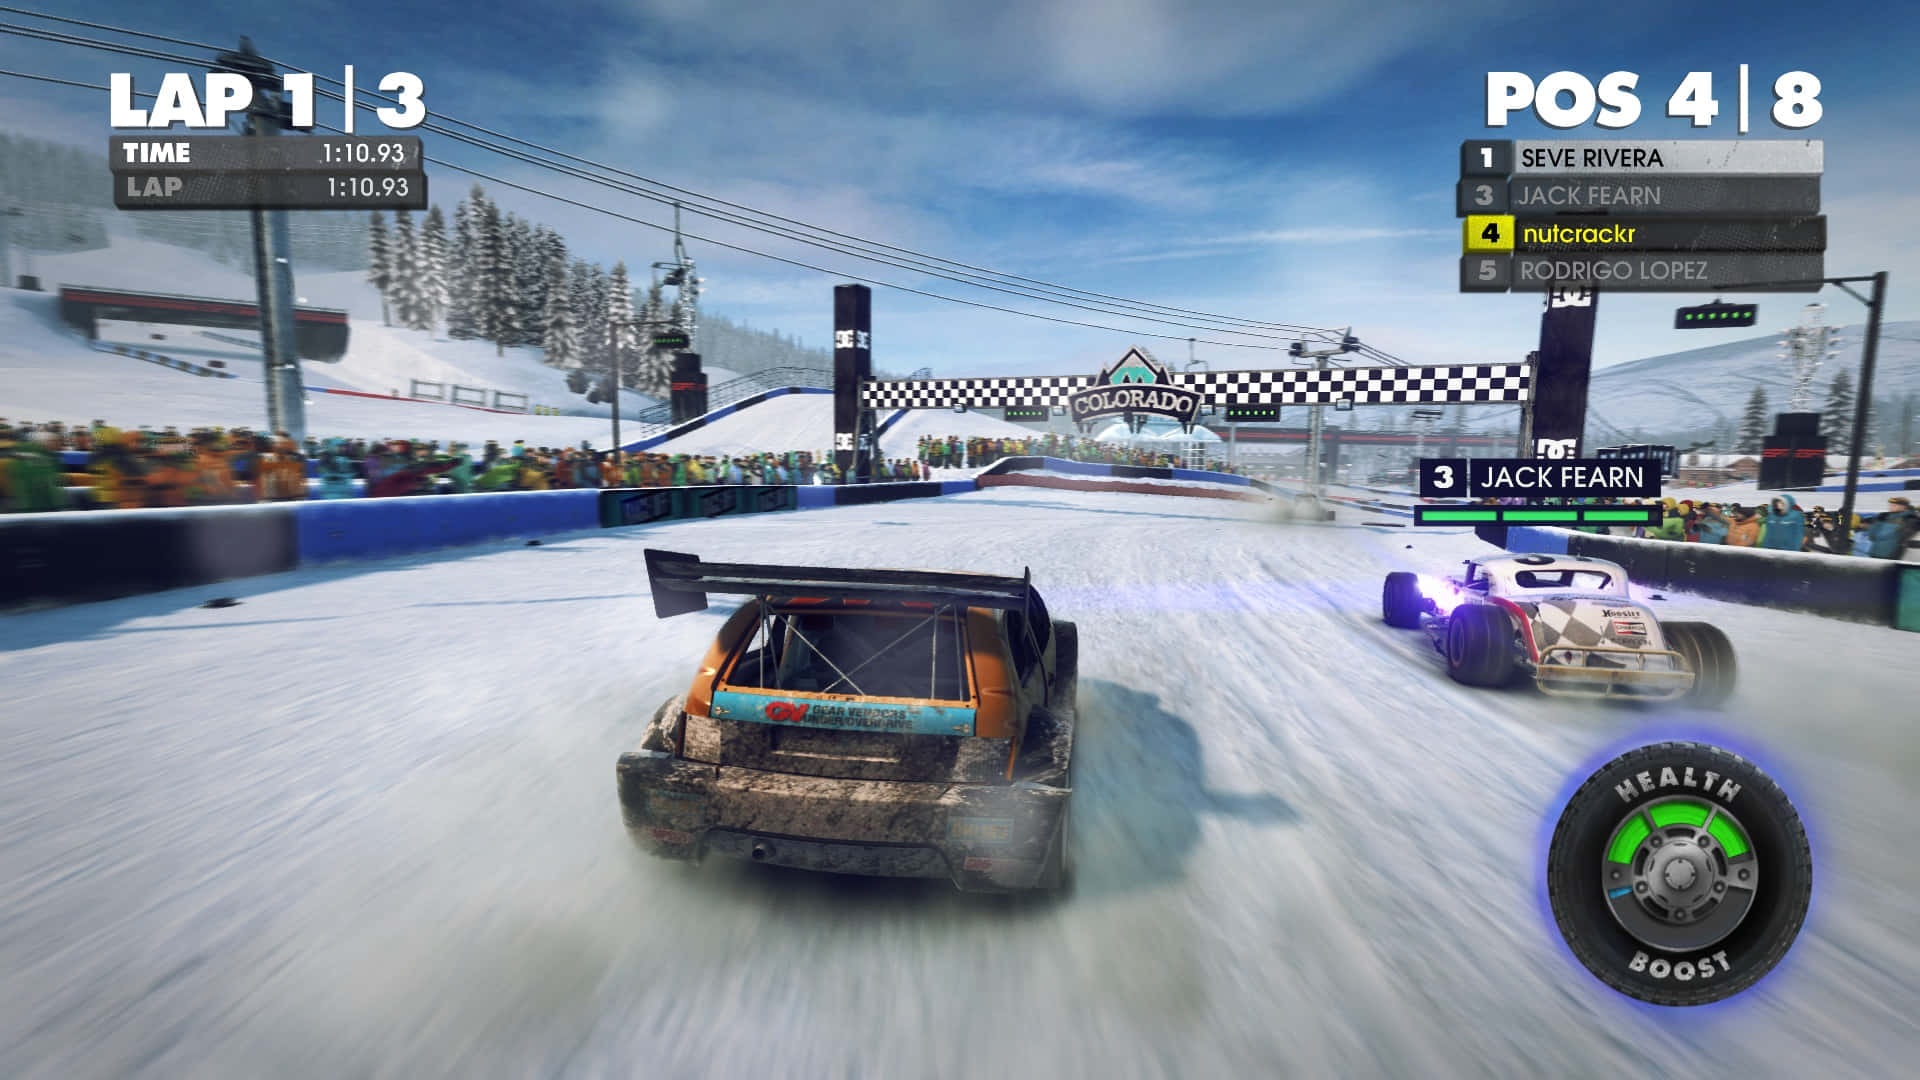 A Game Of A Race Car Driving Down A Snowy Road